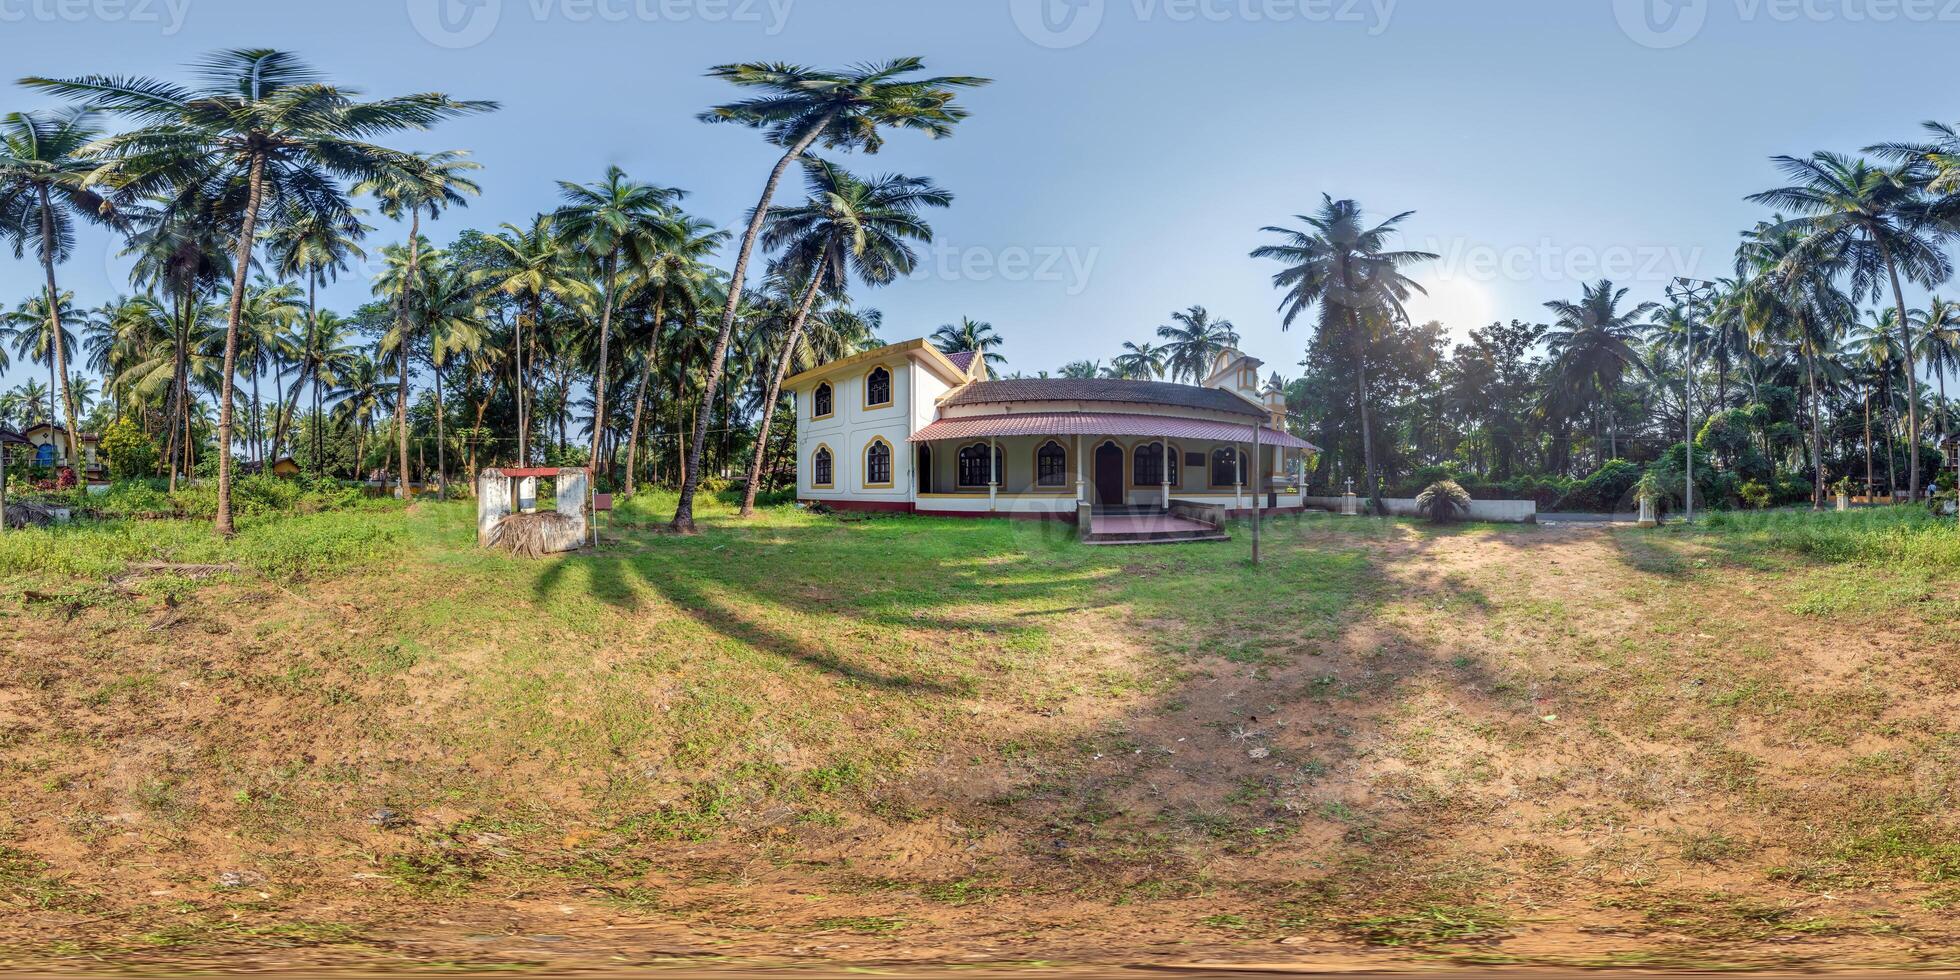 full hdri 360 panorama of portugal catholic church in jungle among palm trees in Indian tropic village in equirectangular projection with zenith and nadir. VR AR content photo